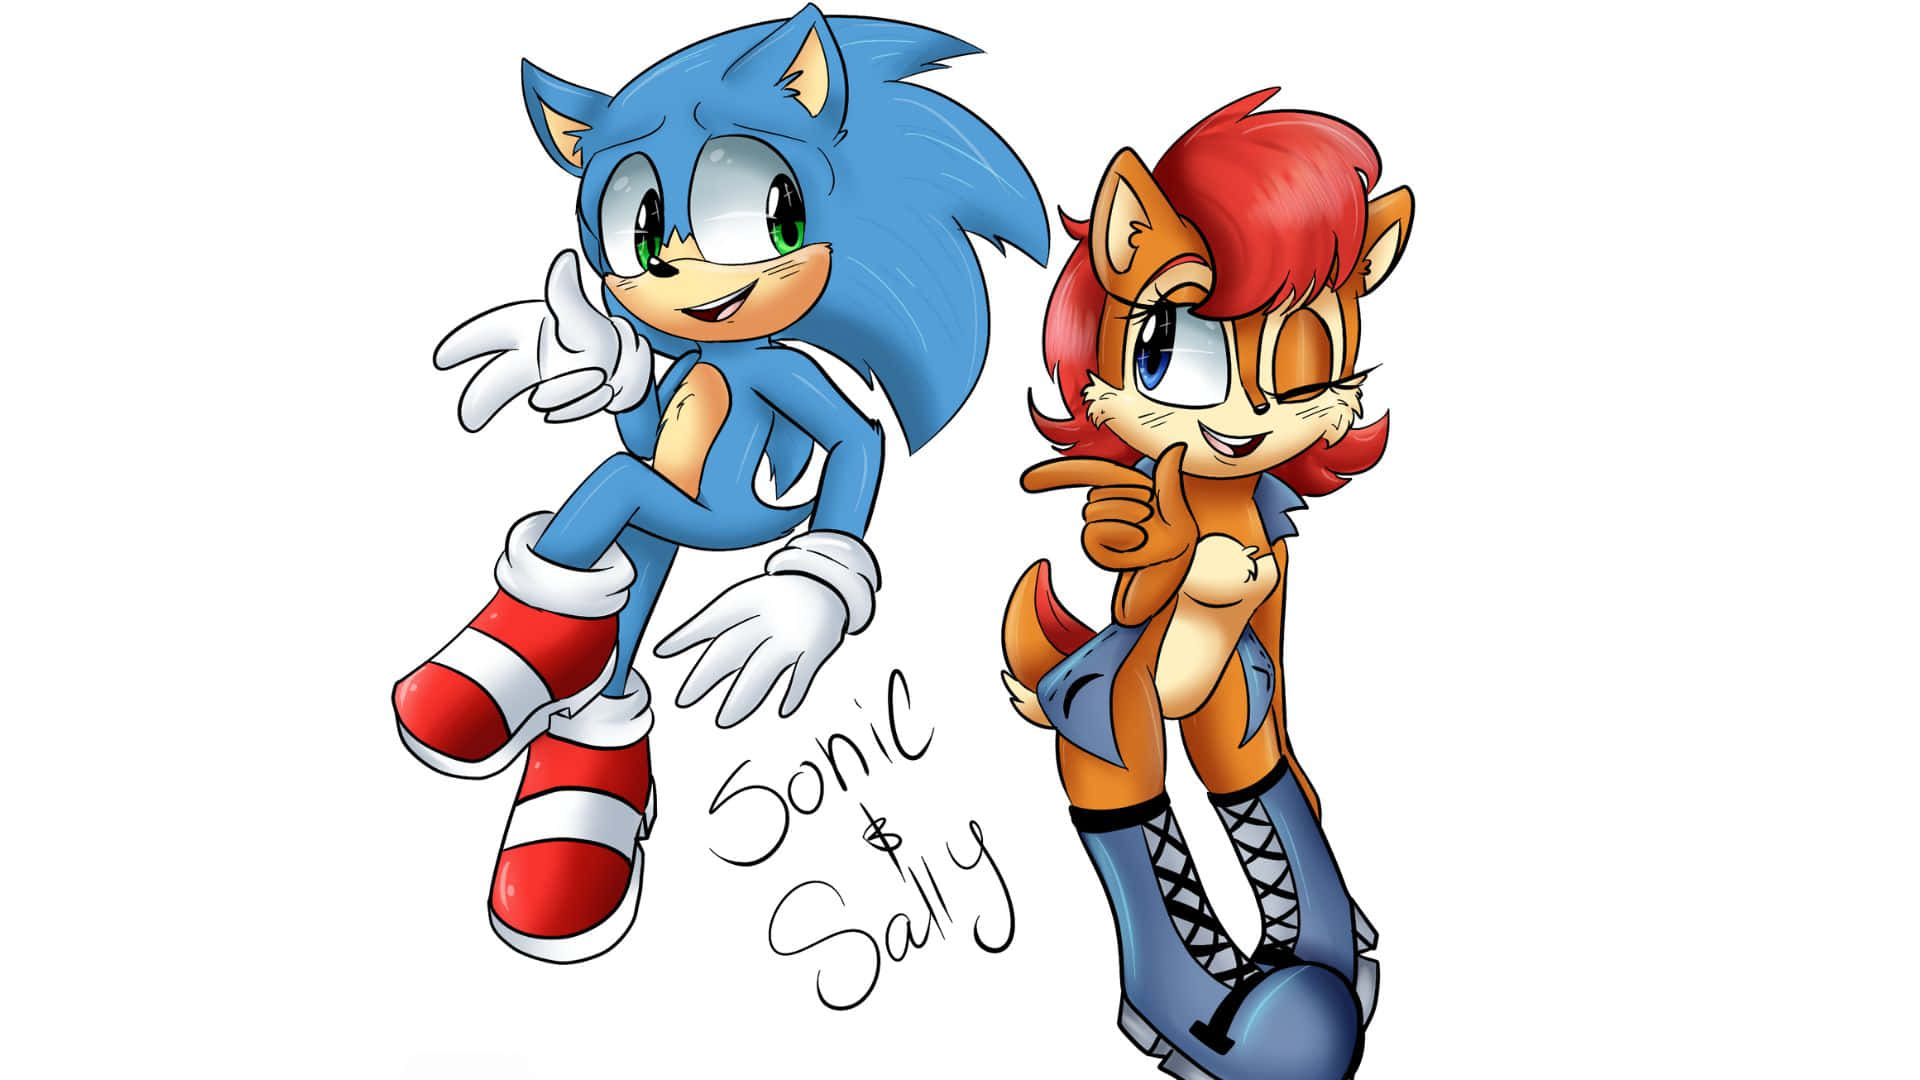 Sonic and Sally share a moment together Wallpaper